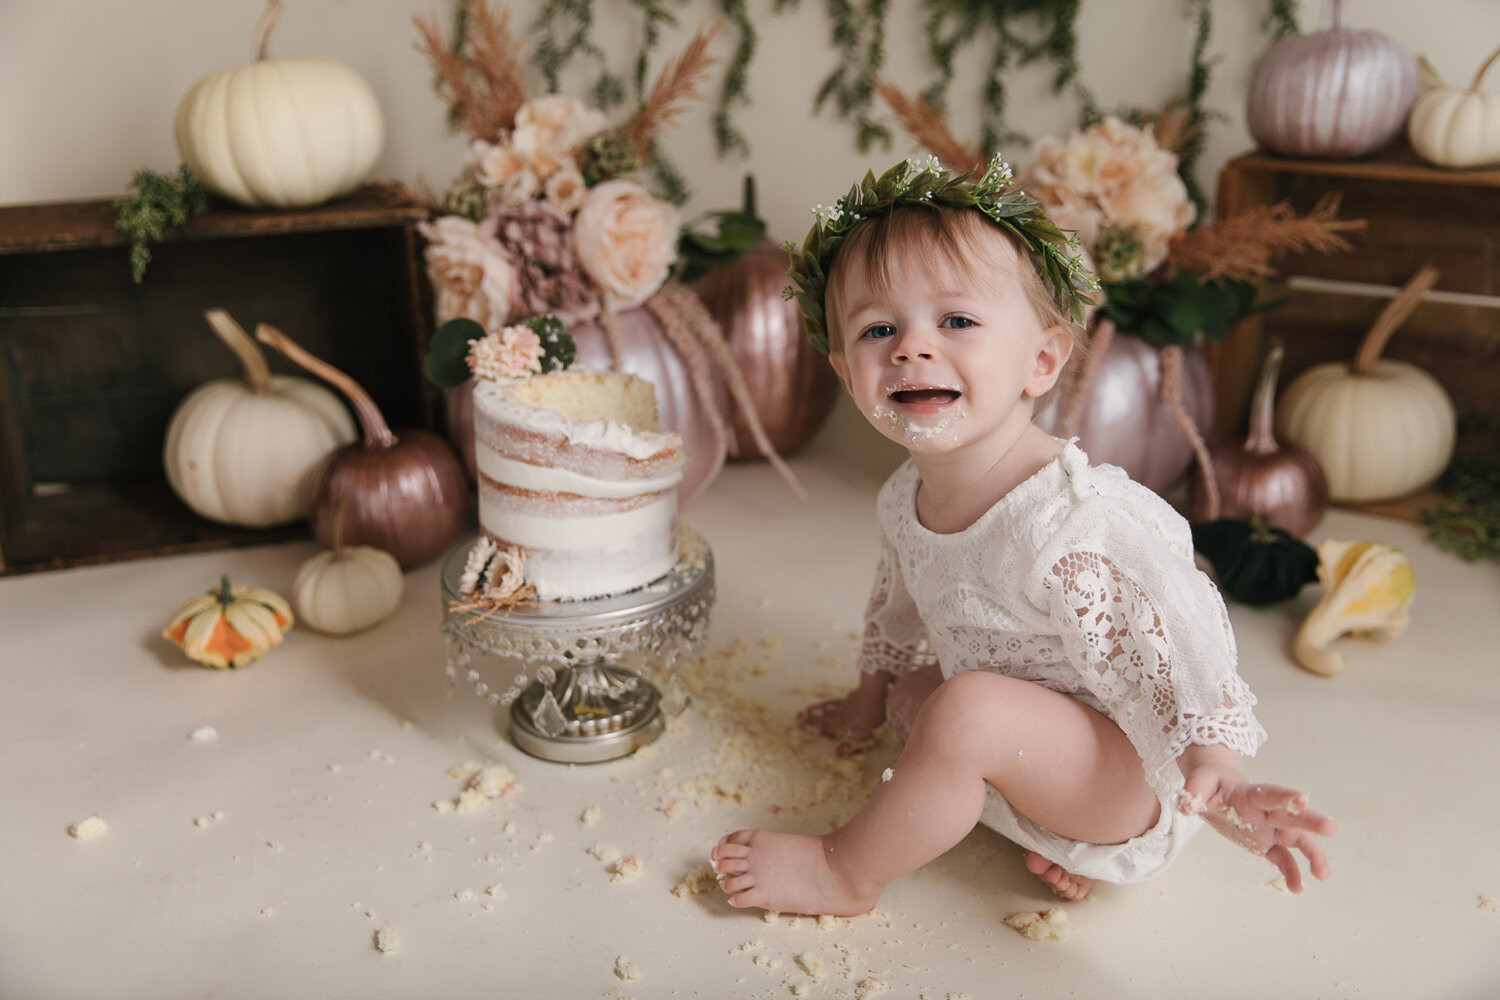 Baby_Girl_Birthday_Session_in_Studio_Smash_and_Splash_Photos_Pink_and_Cream_Little_Pumpkin_Theme_Baby_Girl_Frist_Birthday_Shoot_October_and_Fall_Soft_Color_Pallet_by_Baby_Photographer_Christie_Leigh_Photo_in_Cortland_Ohio-6.JPG